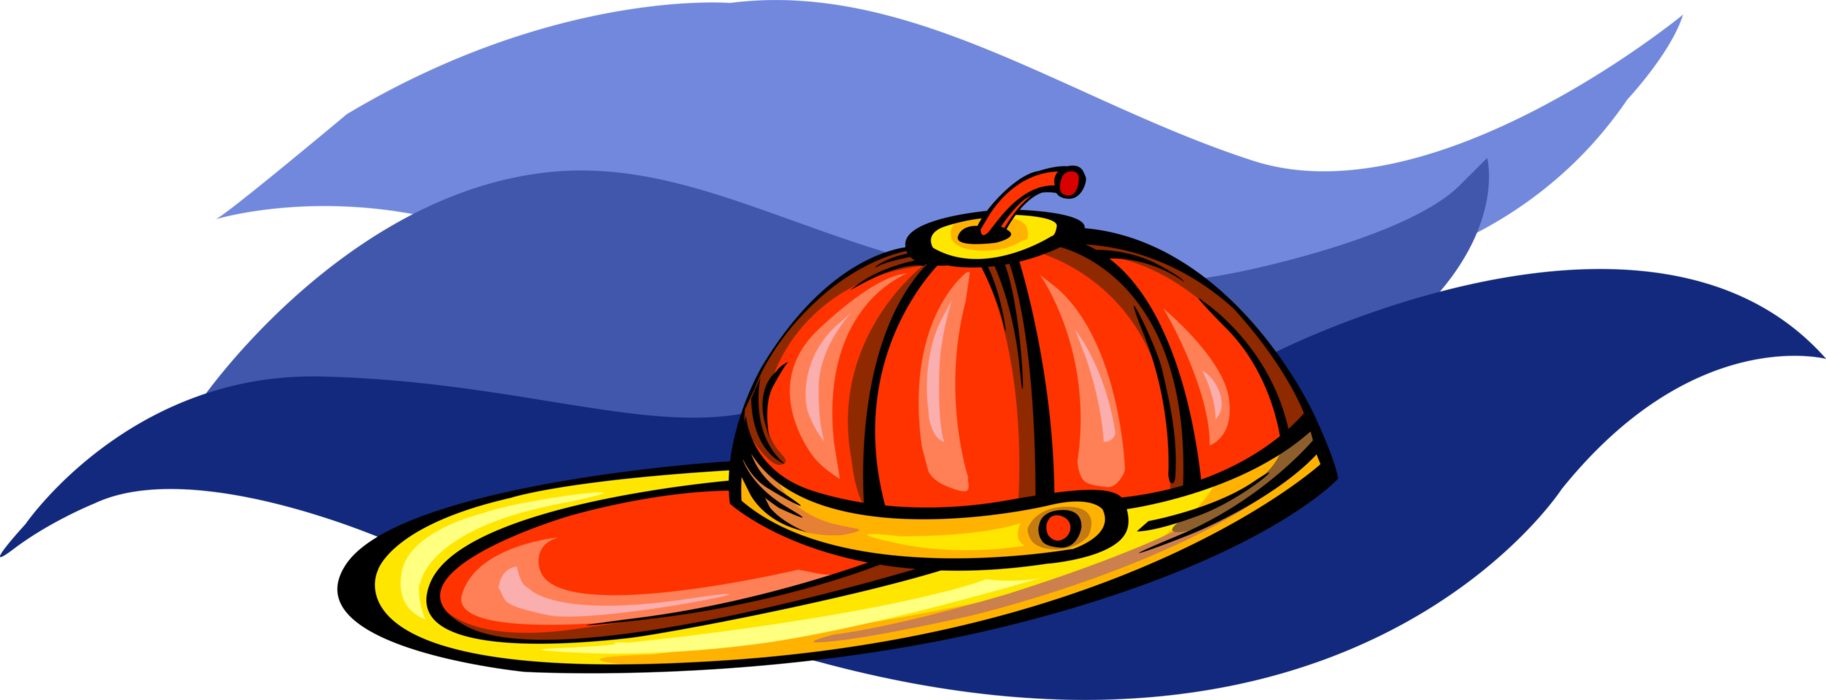 Vector Illustration of Child's Cap or Hat